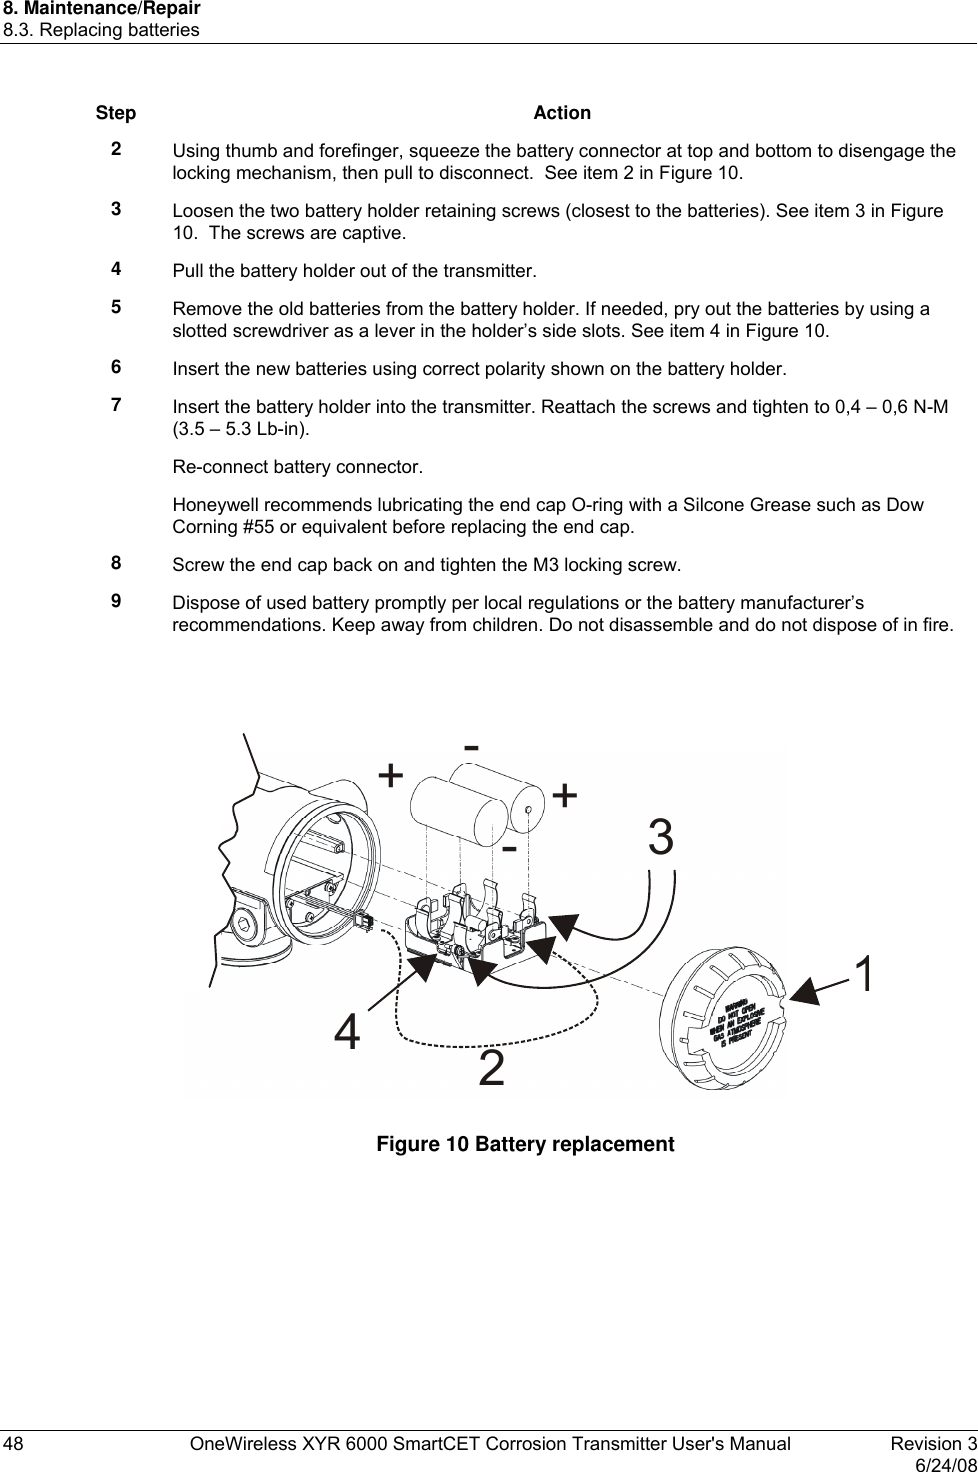 8. Maintenance/Repair 8.3. Replacing batteries 48  OneWireless XYR 6000 SmartCET Corrosion Transmitter User&apos;s Manual   Revision 3   6/24/08 Step Action 2  Using thumb and forefinger, squeeze the battery connector at top and bottom to disengage the locking mechanism, then pull to disconnect.  See item 2 in Figure 10. 3  Loosen the two battery holder retaining screws (closest to the batteries). See item 3 in Figure 10.  The screws are captive. 4  Pull the battery holder out of the transmitter. 5  Remove the old batteries from the battery holder. If needed, pry out the batteries by using a slotted screwdriver as a lever in the holder’s side slots. See item 4 in Figure 10. 6  Insert the new batteries using correct polarity shown on the battery holder. 7  Insert the battery holder into the transmitter. Reattach the screws and tighten to 0,4 – 0,6 N-M (3.5 – 5.3 Lb-in). Re-connect battery connector. Honeywell recommends lubricating the end cap O-ring with a Silcone Grease such as Dow Corning #55 or equivalent before replacing the end cap. 8  Screw the end cap back on and tighten the M3 locking screw. 9  Dispose of used battery promptly per local regulations or the battery manufacturer’s recommendations. Keep away from children. Do not disassemble and do not dispose of in fire.   12+-+-34  Figure 10 Battery replacement  